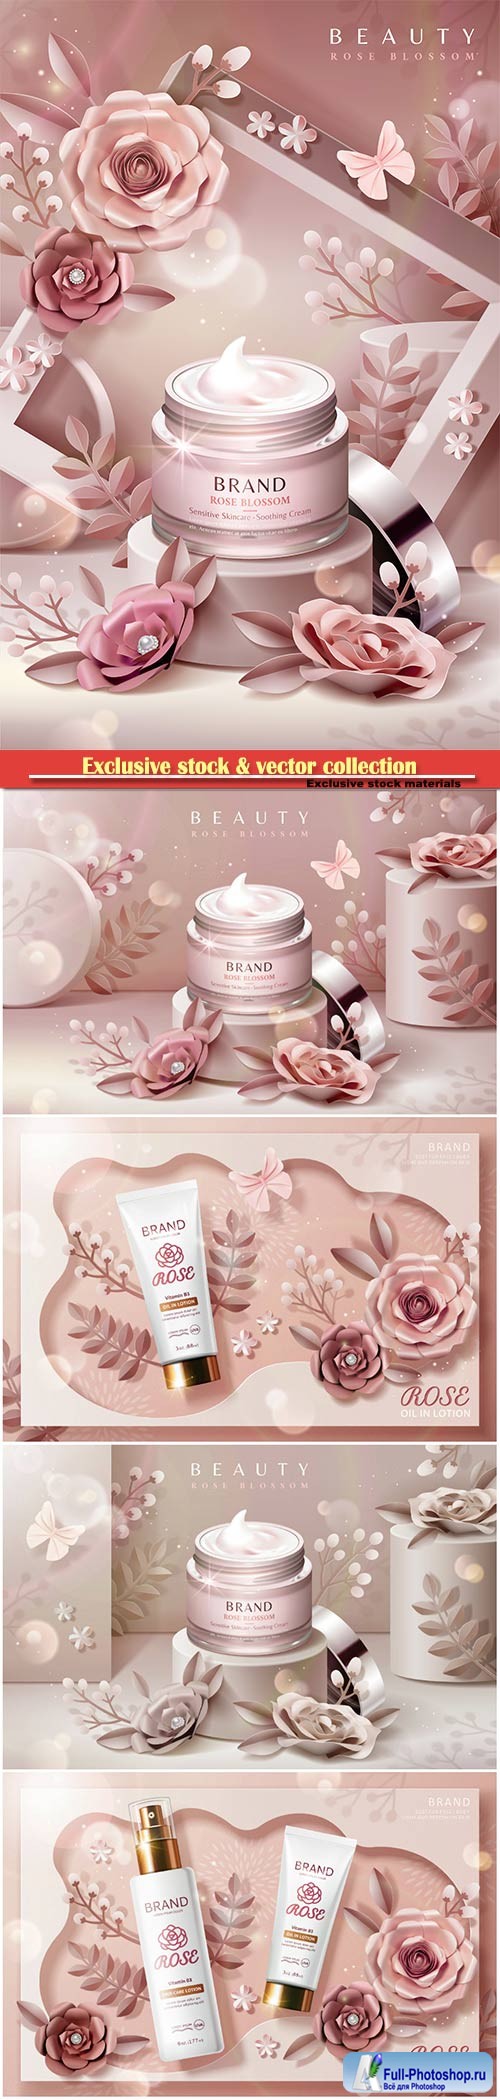 Cream jar ads on podium with paper flowers and frame background in 3d illustration